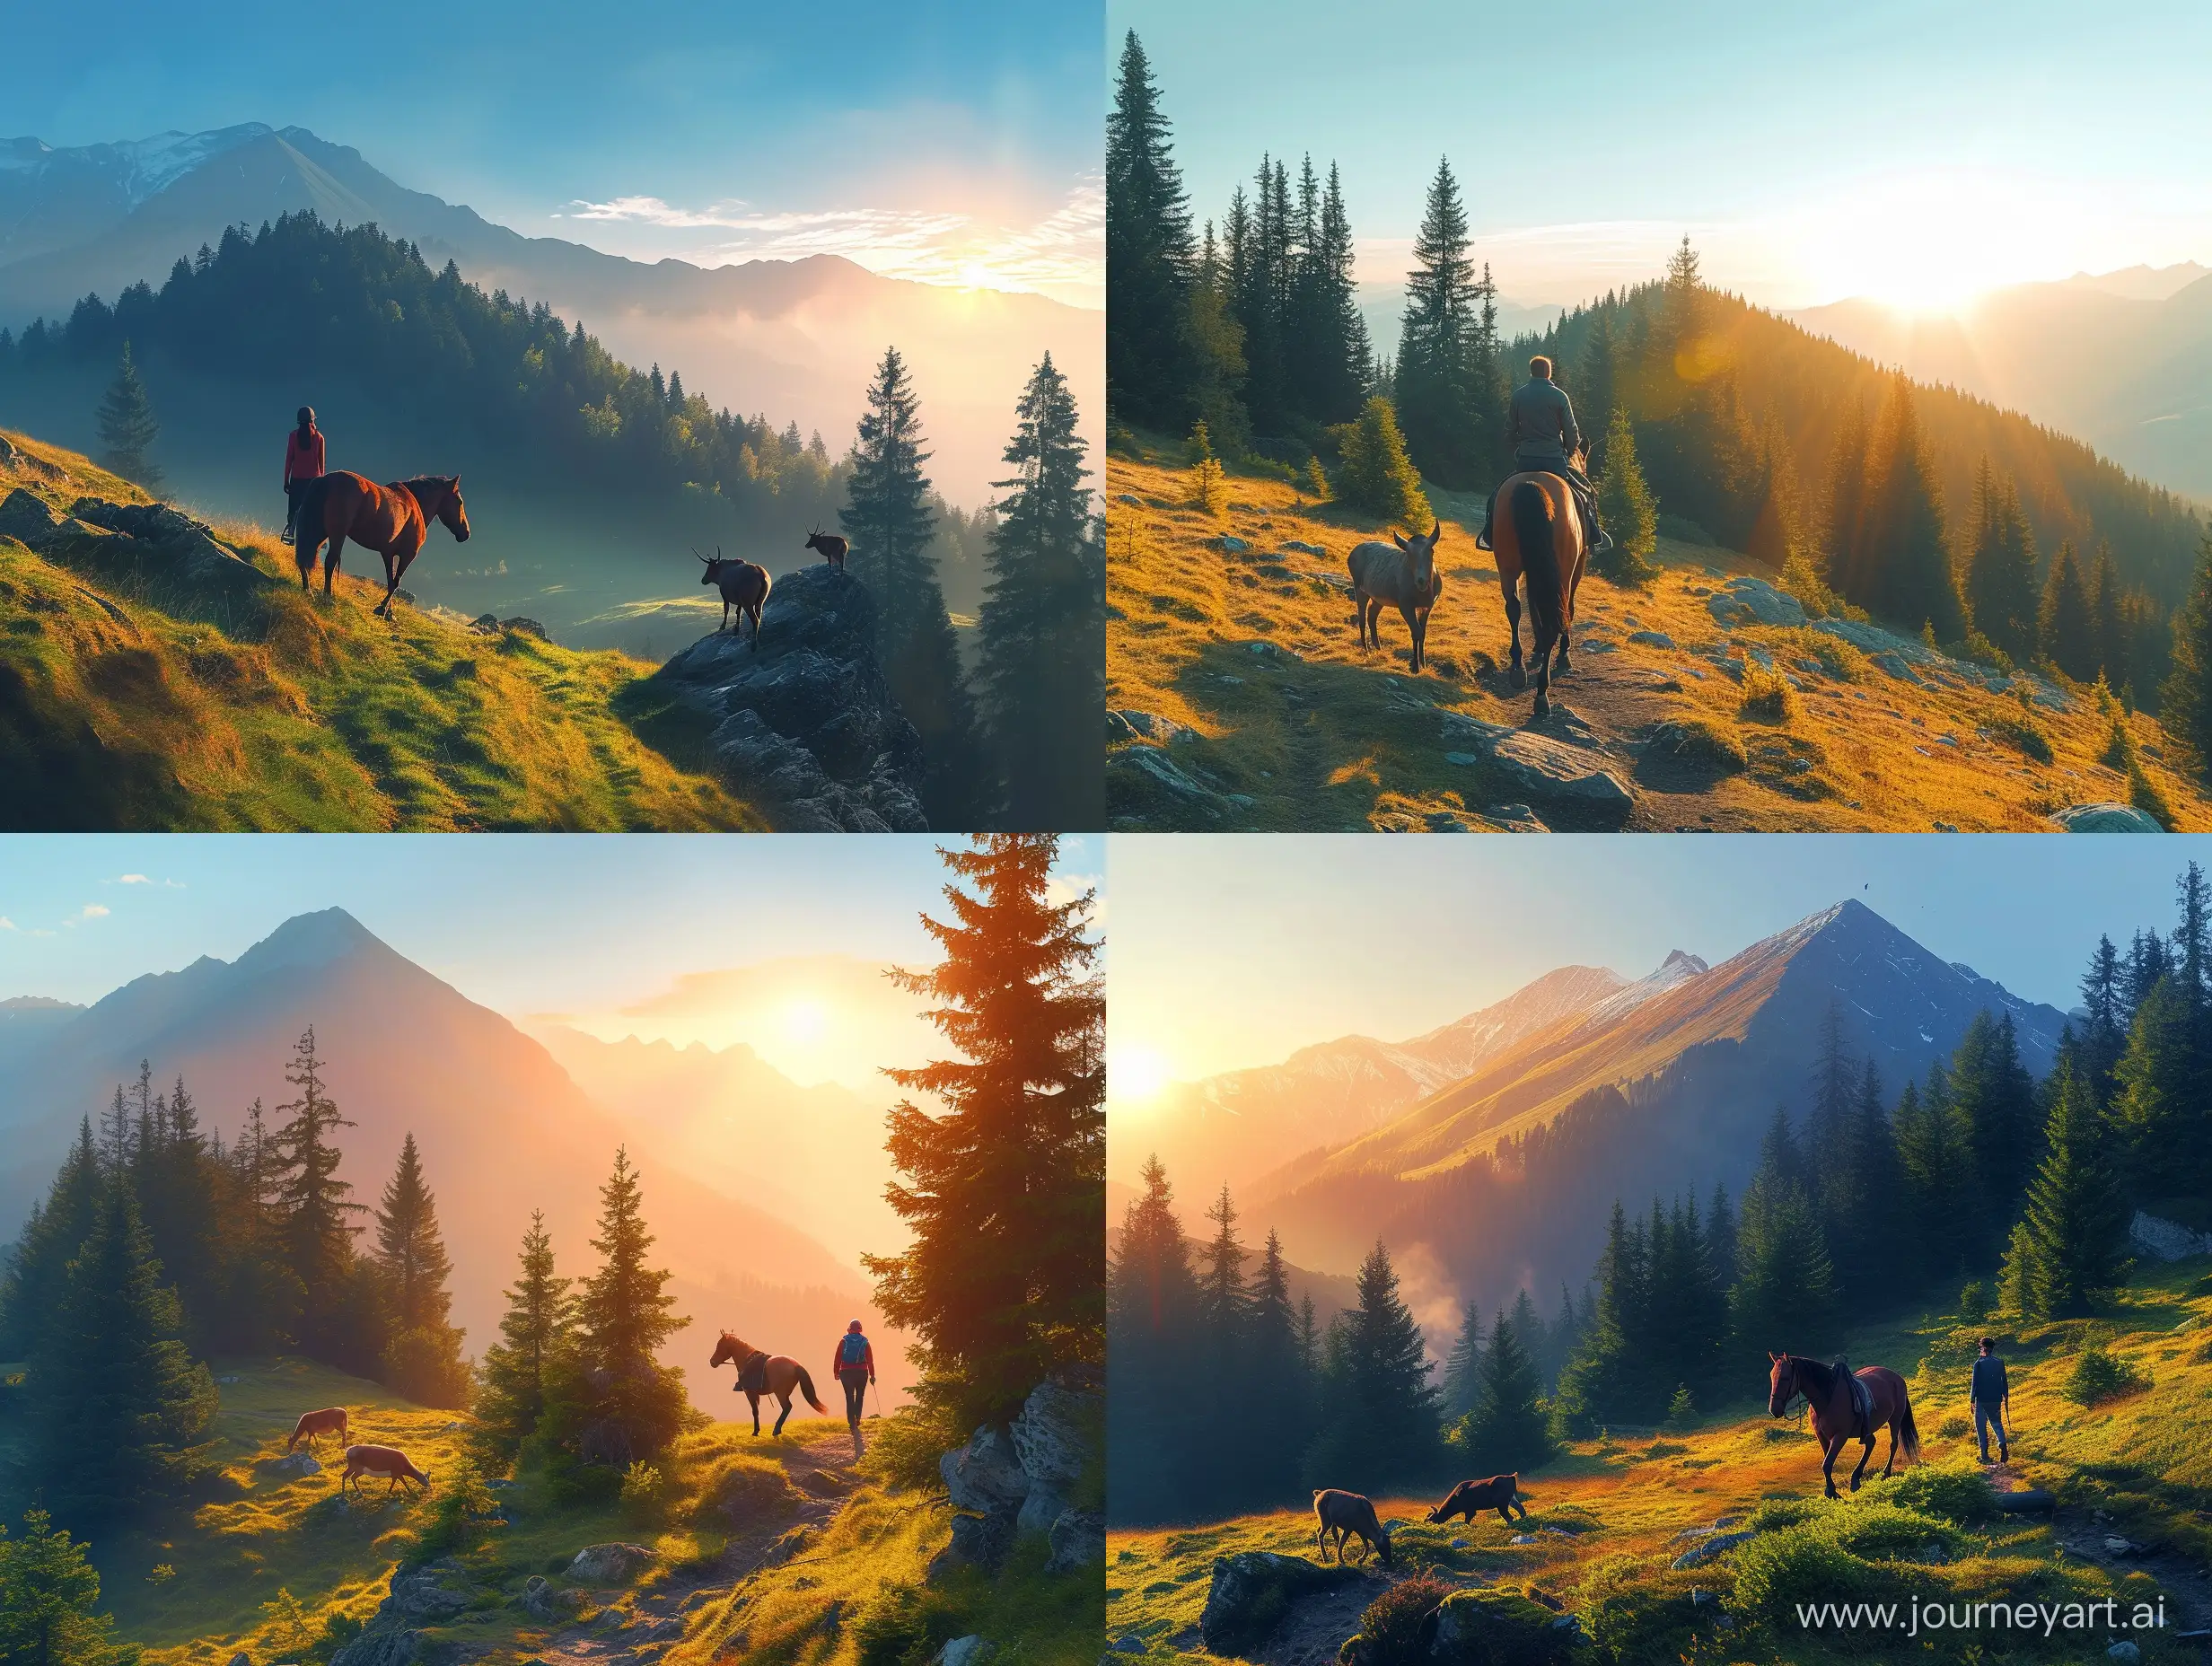 Scenic-Mountain-Stroll-Sunset-Walk-with-Horse-in-Alpine-Forest